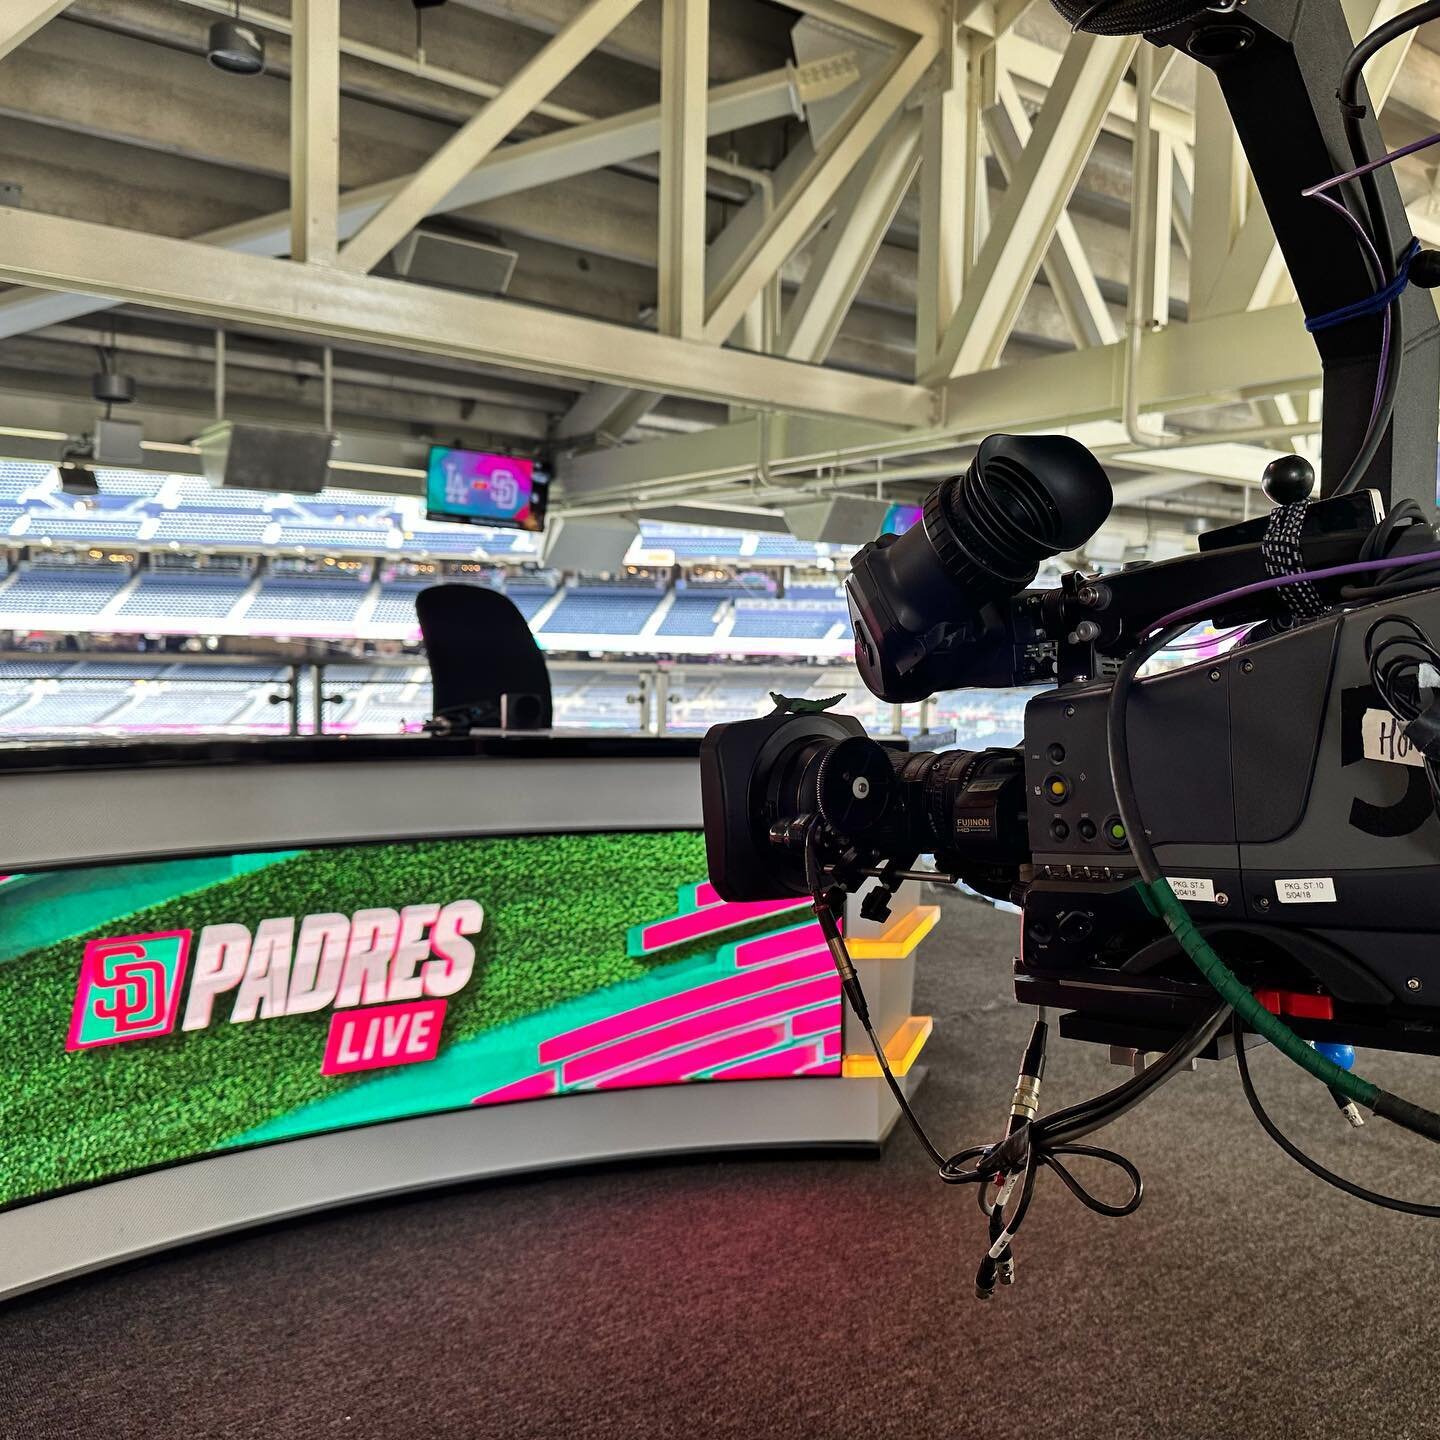 It&rsquo;s City Connect night at #PetcoPark! The @padres take on the @dodgers at 6:40pm, with #PadresLive pregame and postgame shows before and after the broadcast. 📺⚾️Tune in on @ballysportssd! #local795